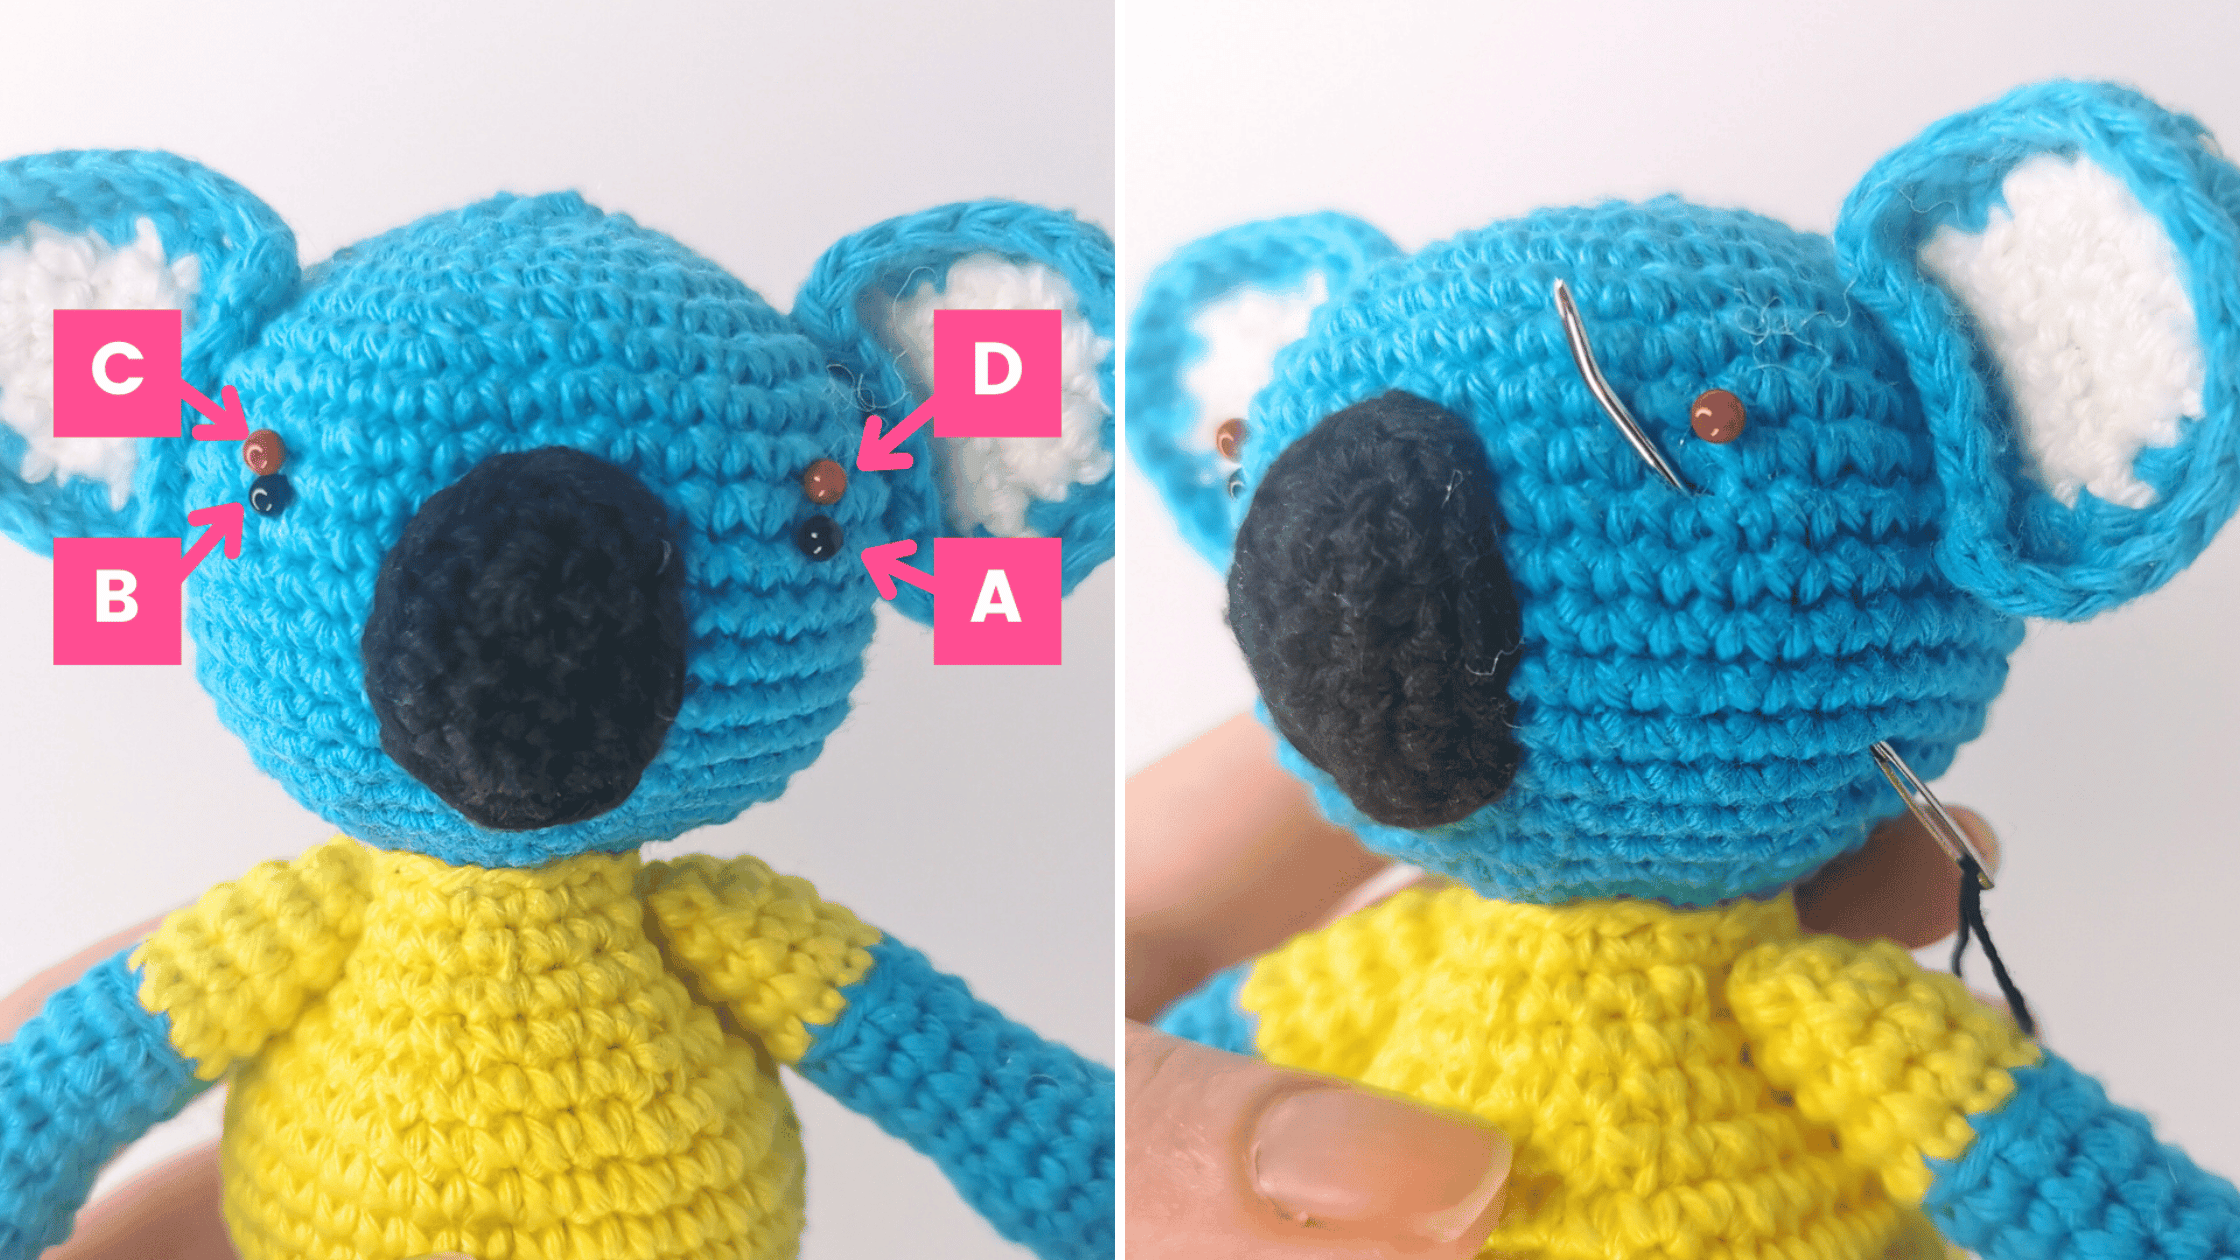 How to Sew Eyes on Amigurumi & More Face Embroidery